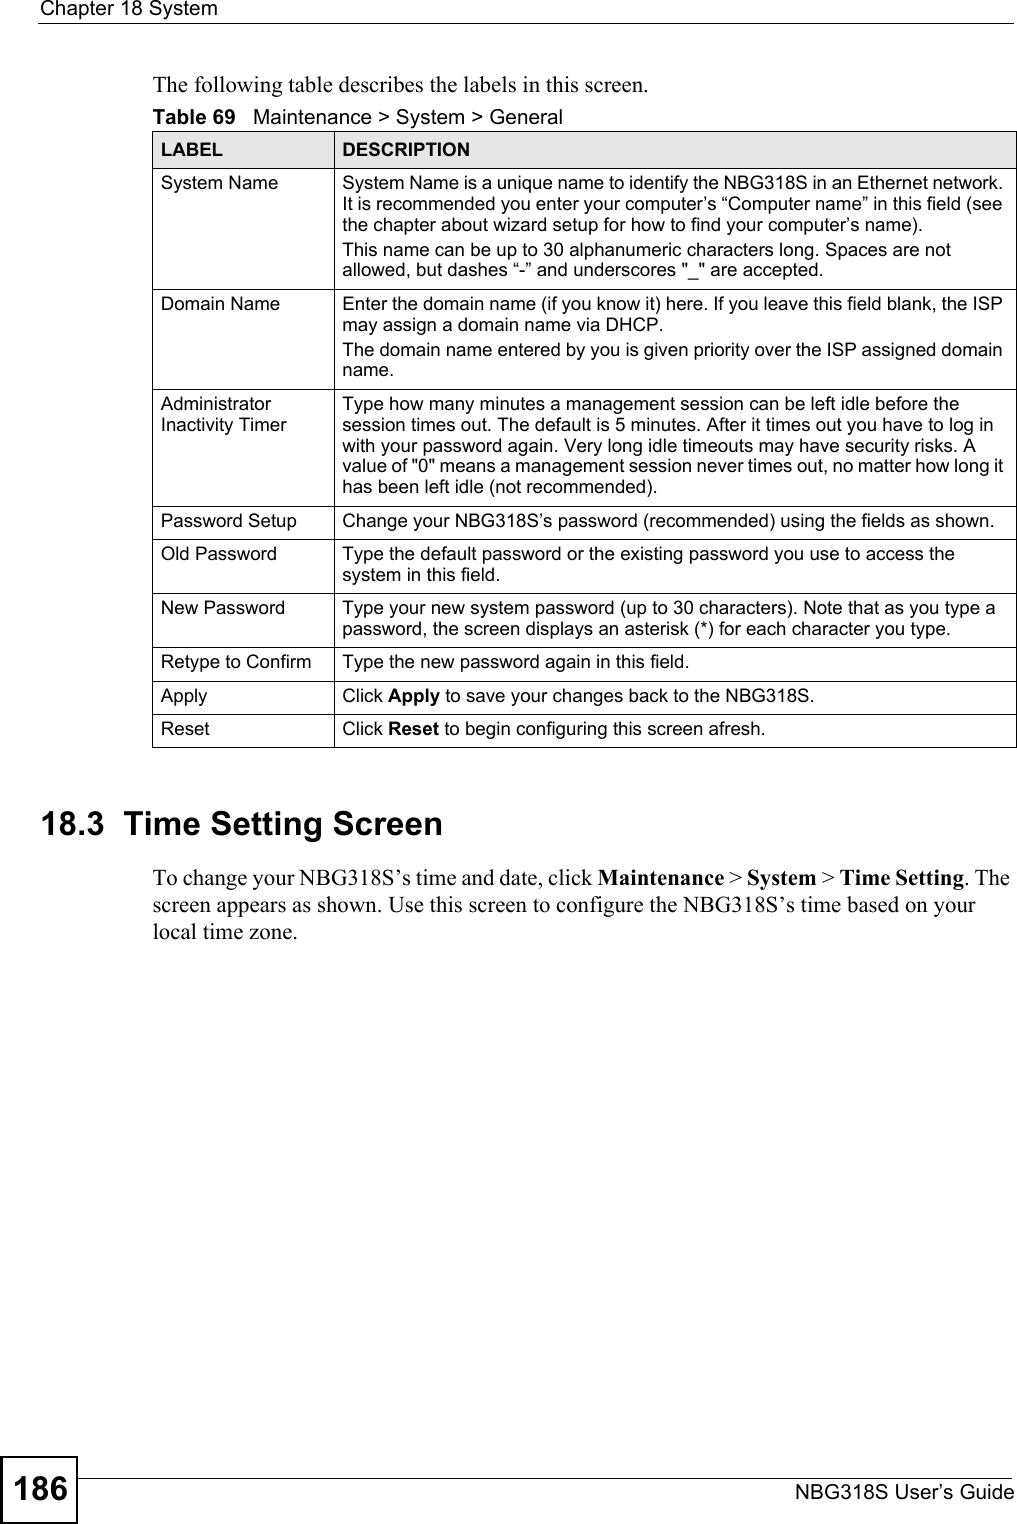 Chapter 18 SystemNBG318S User’s Guide186The following table describes the labels in this screen.18.3  Time Setting ScreenTo change your NBG318S’s time and date, click Maintenance &gt; System &gt; Time Setting. The screen appears as shown. Use this screen to configure the NBG318S’s time based on your local time zone.Table 69   Maintenance &gt; System &gt; GeneralLABEL DESCRIPTIONSystem Name System Name is a unique name to identify the NBG318S in an Ethernet network. It is recommended you enter your computer’s “Computer name” in this field (see the chapter about wizard setup for how to find your computer’s name). This name can be up to 30 alphanumeric characters long. Spaces are not allowed, but dashes “-” and underscores &quot;_&quot; are accepted.Domain Name Enter the domain name (if you know it) here. If you leave this field blank, the ISP may assign a domain name via DHCP. The domain name entered by you is given priority over the ISP assigned domain name.Administrator Inactivity TimerType how many minutes a management session can be left idle before the session times out. The default is 5 minutes. After it times out you have to log in with your password again. Very long idle timeouts may have security risks. A value of &quot;0&quot; means a management session never times out, no matter how long it has been left idle (not recommended).Password Setup Change your NBG318S’s password (recommended) using the fields as shown.Old Password Type the default password or the existing password you use to access the system in this field.New Password Type your new system password (up to 30 characters). Note that as you type a password, the screen displays an asterisk (*) for each character you type.Retype to Confirm Type the new password again in this field.Apply Click Apply to save your changes back to the NBG318S.Reset Click Reset to begin configuring this screen afresh.